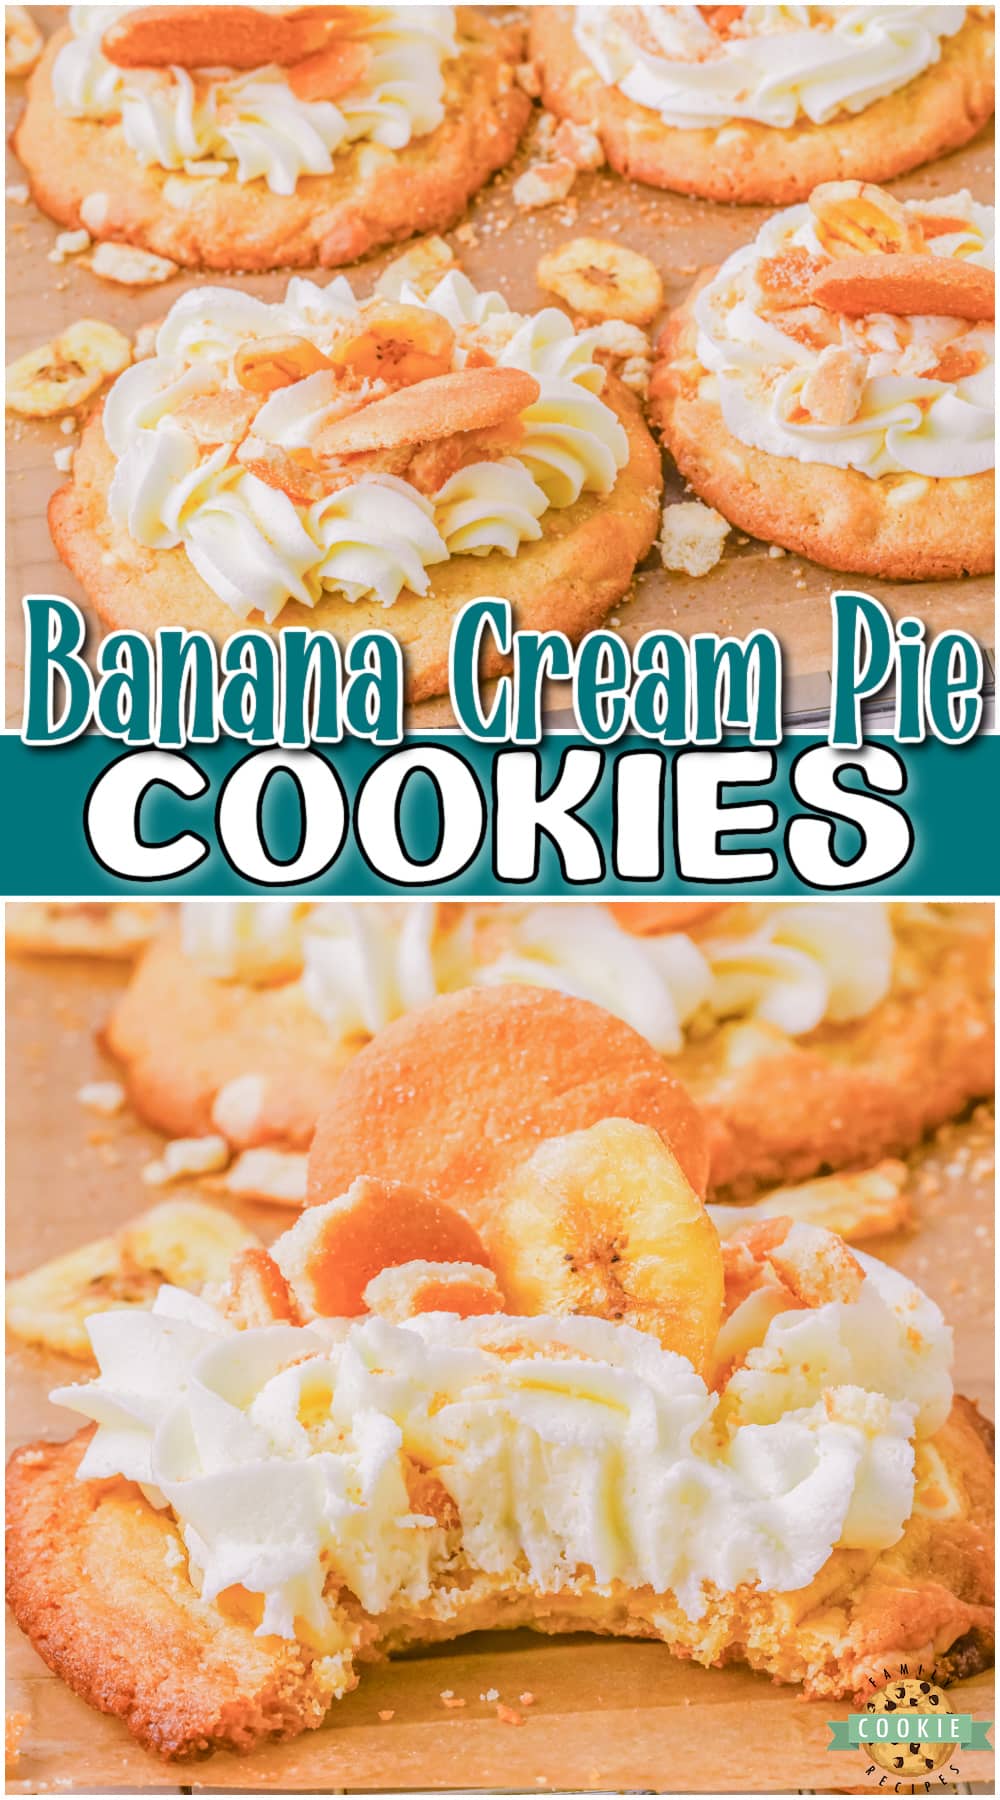 Banana Cream Cookies made with banana pudding, Nilla wafers & buttercream frosting. This banana cookie recipe is a fun twist on the classic banana cream pie!